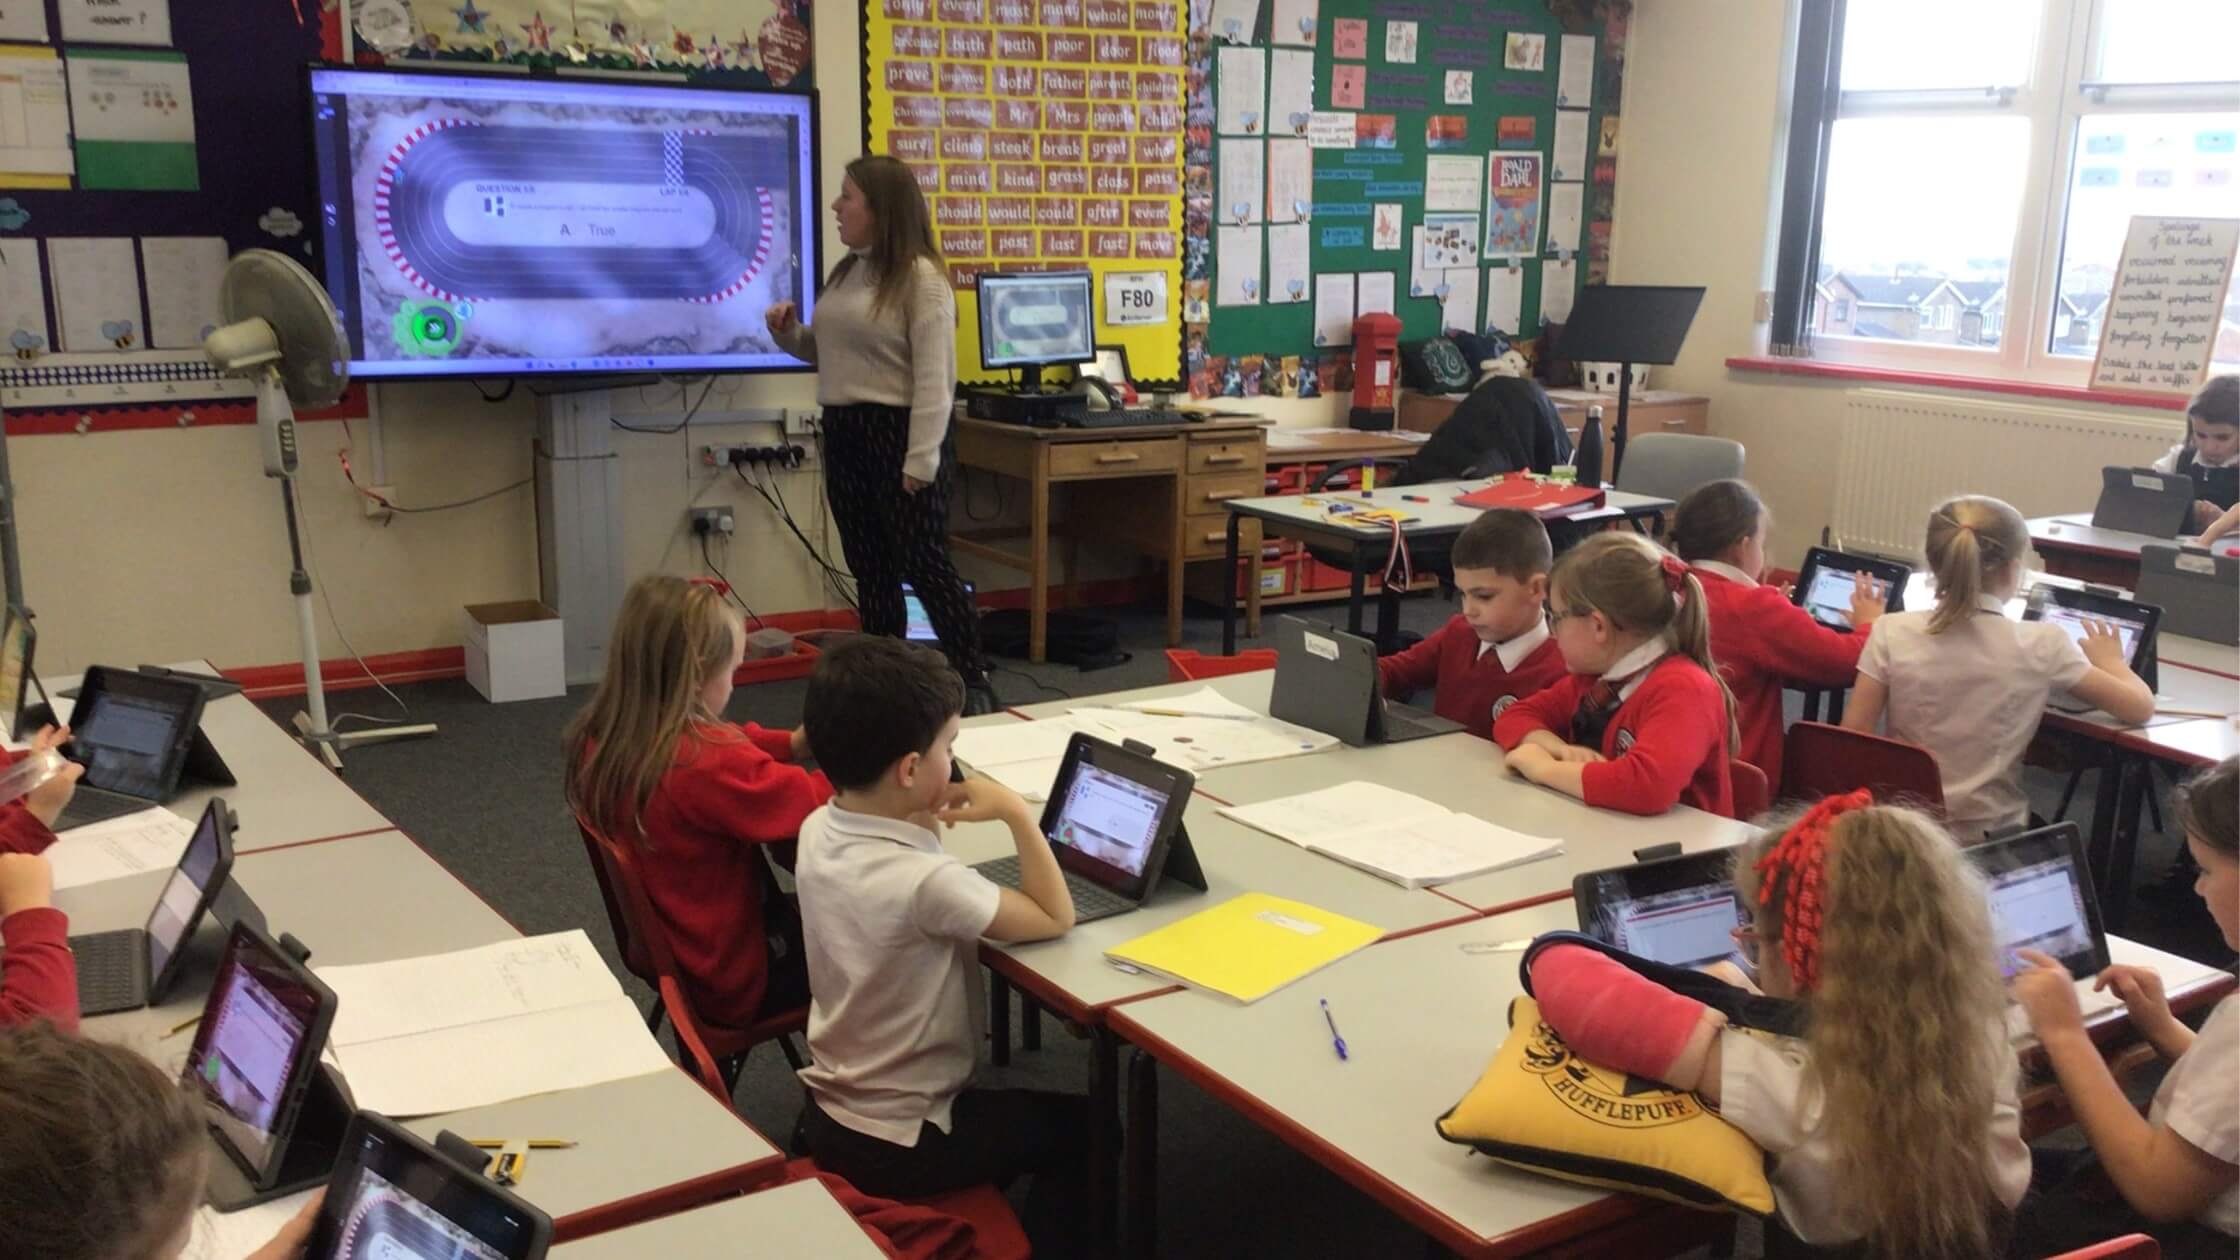 Alt text:	A classroom at Sandford Hill Primary School showcasing students working on their student devices and a teacher instructing on her SMART Board.